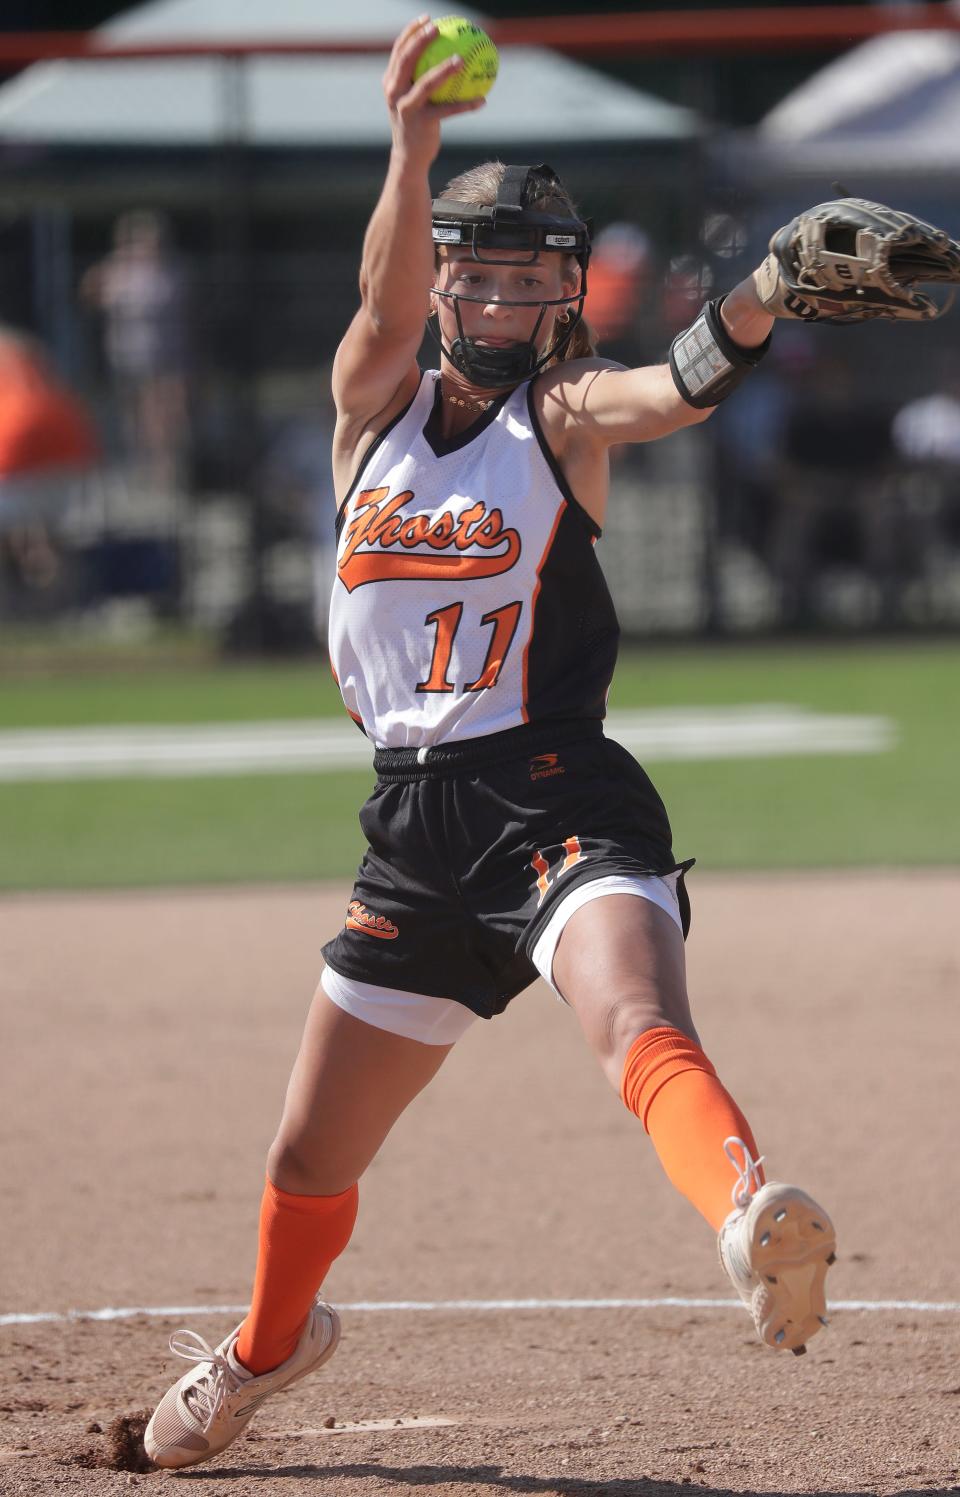 Kaukauna junior pitcher Karly Meredith helped lead the Ghosts to their third consecutive WIAA Division 1 state title last spring.